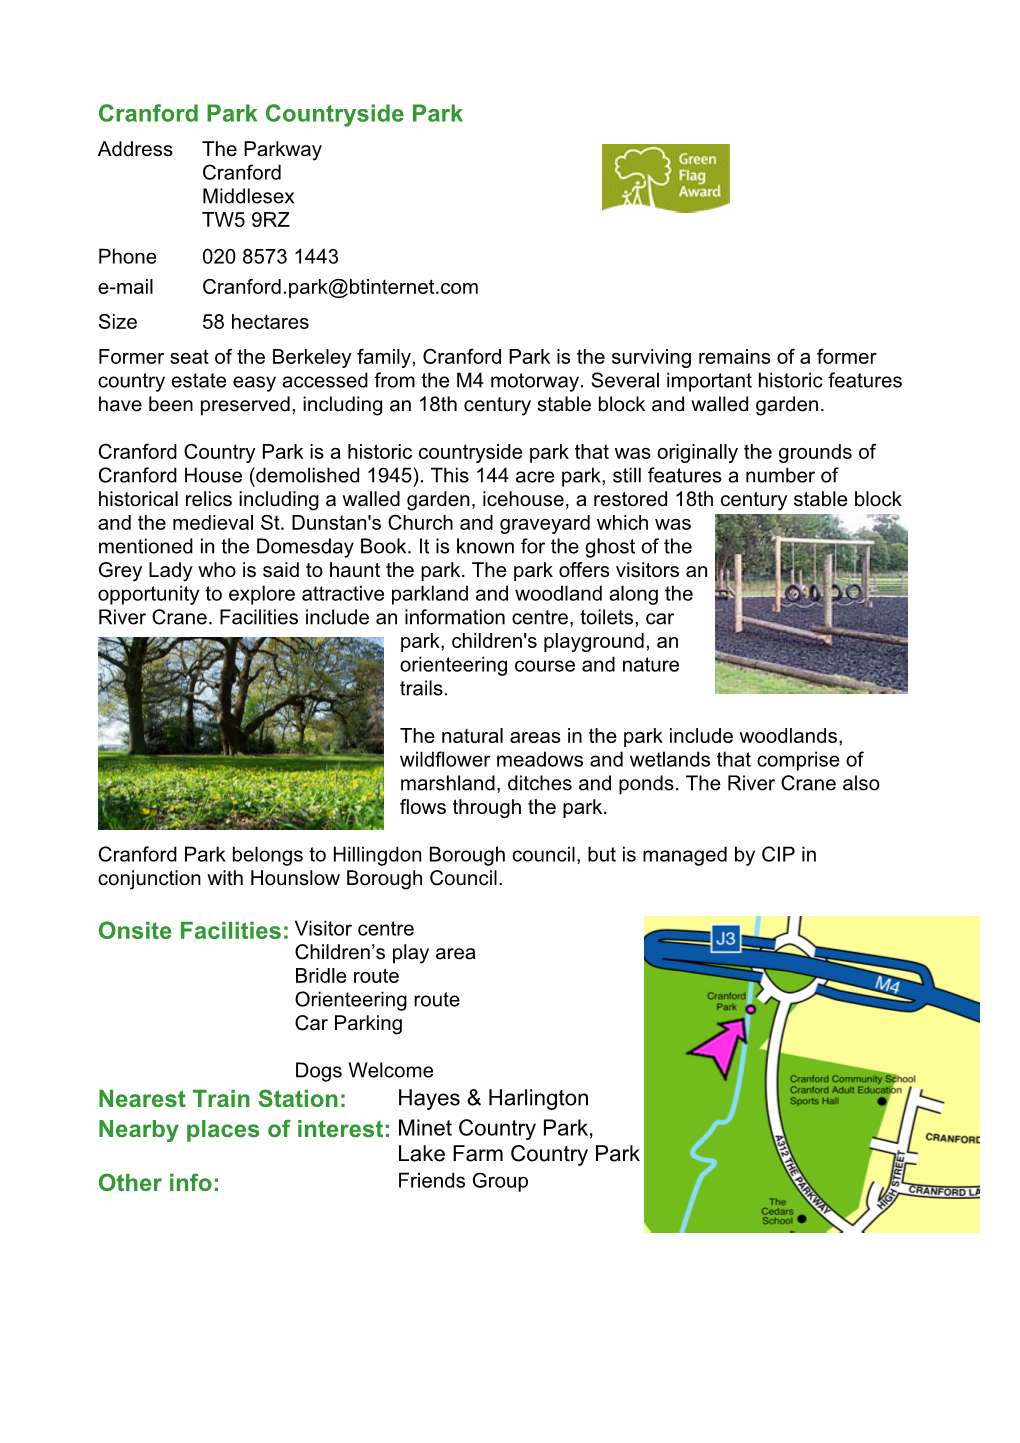 Minet Country Park, Lake Farm Country Park Other Info: Friends Group